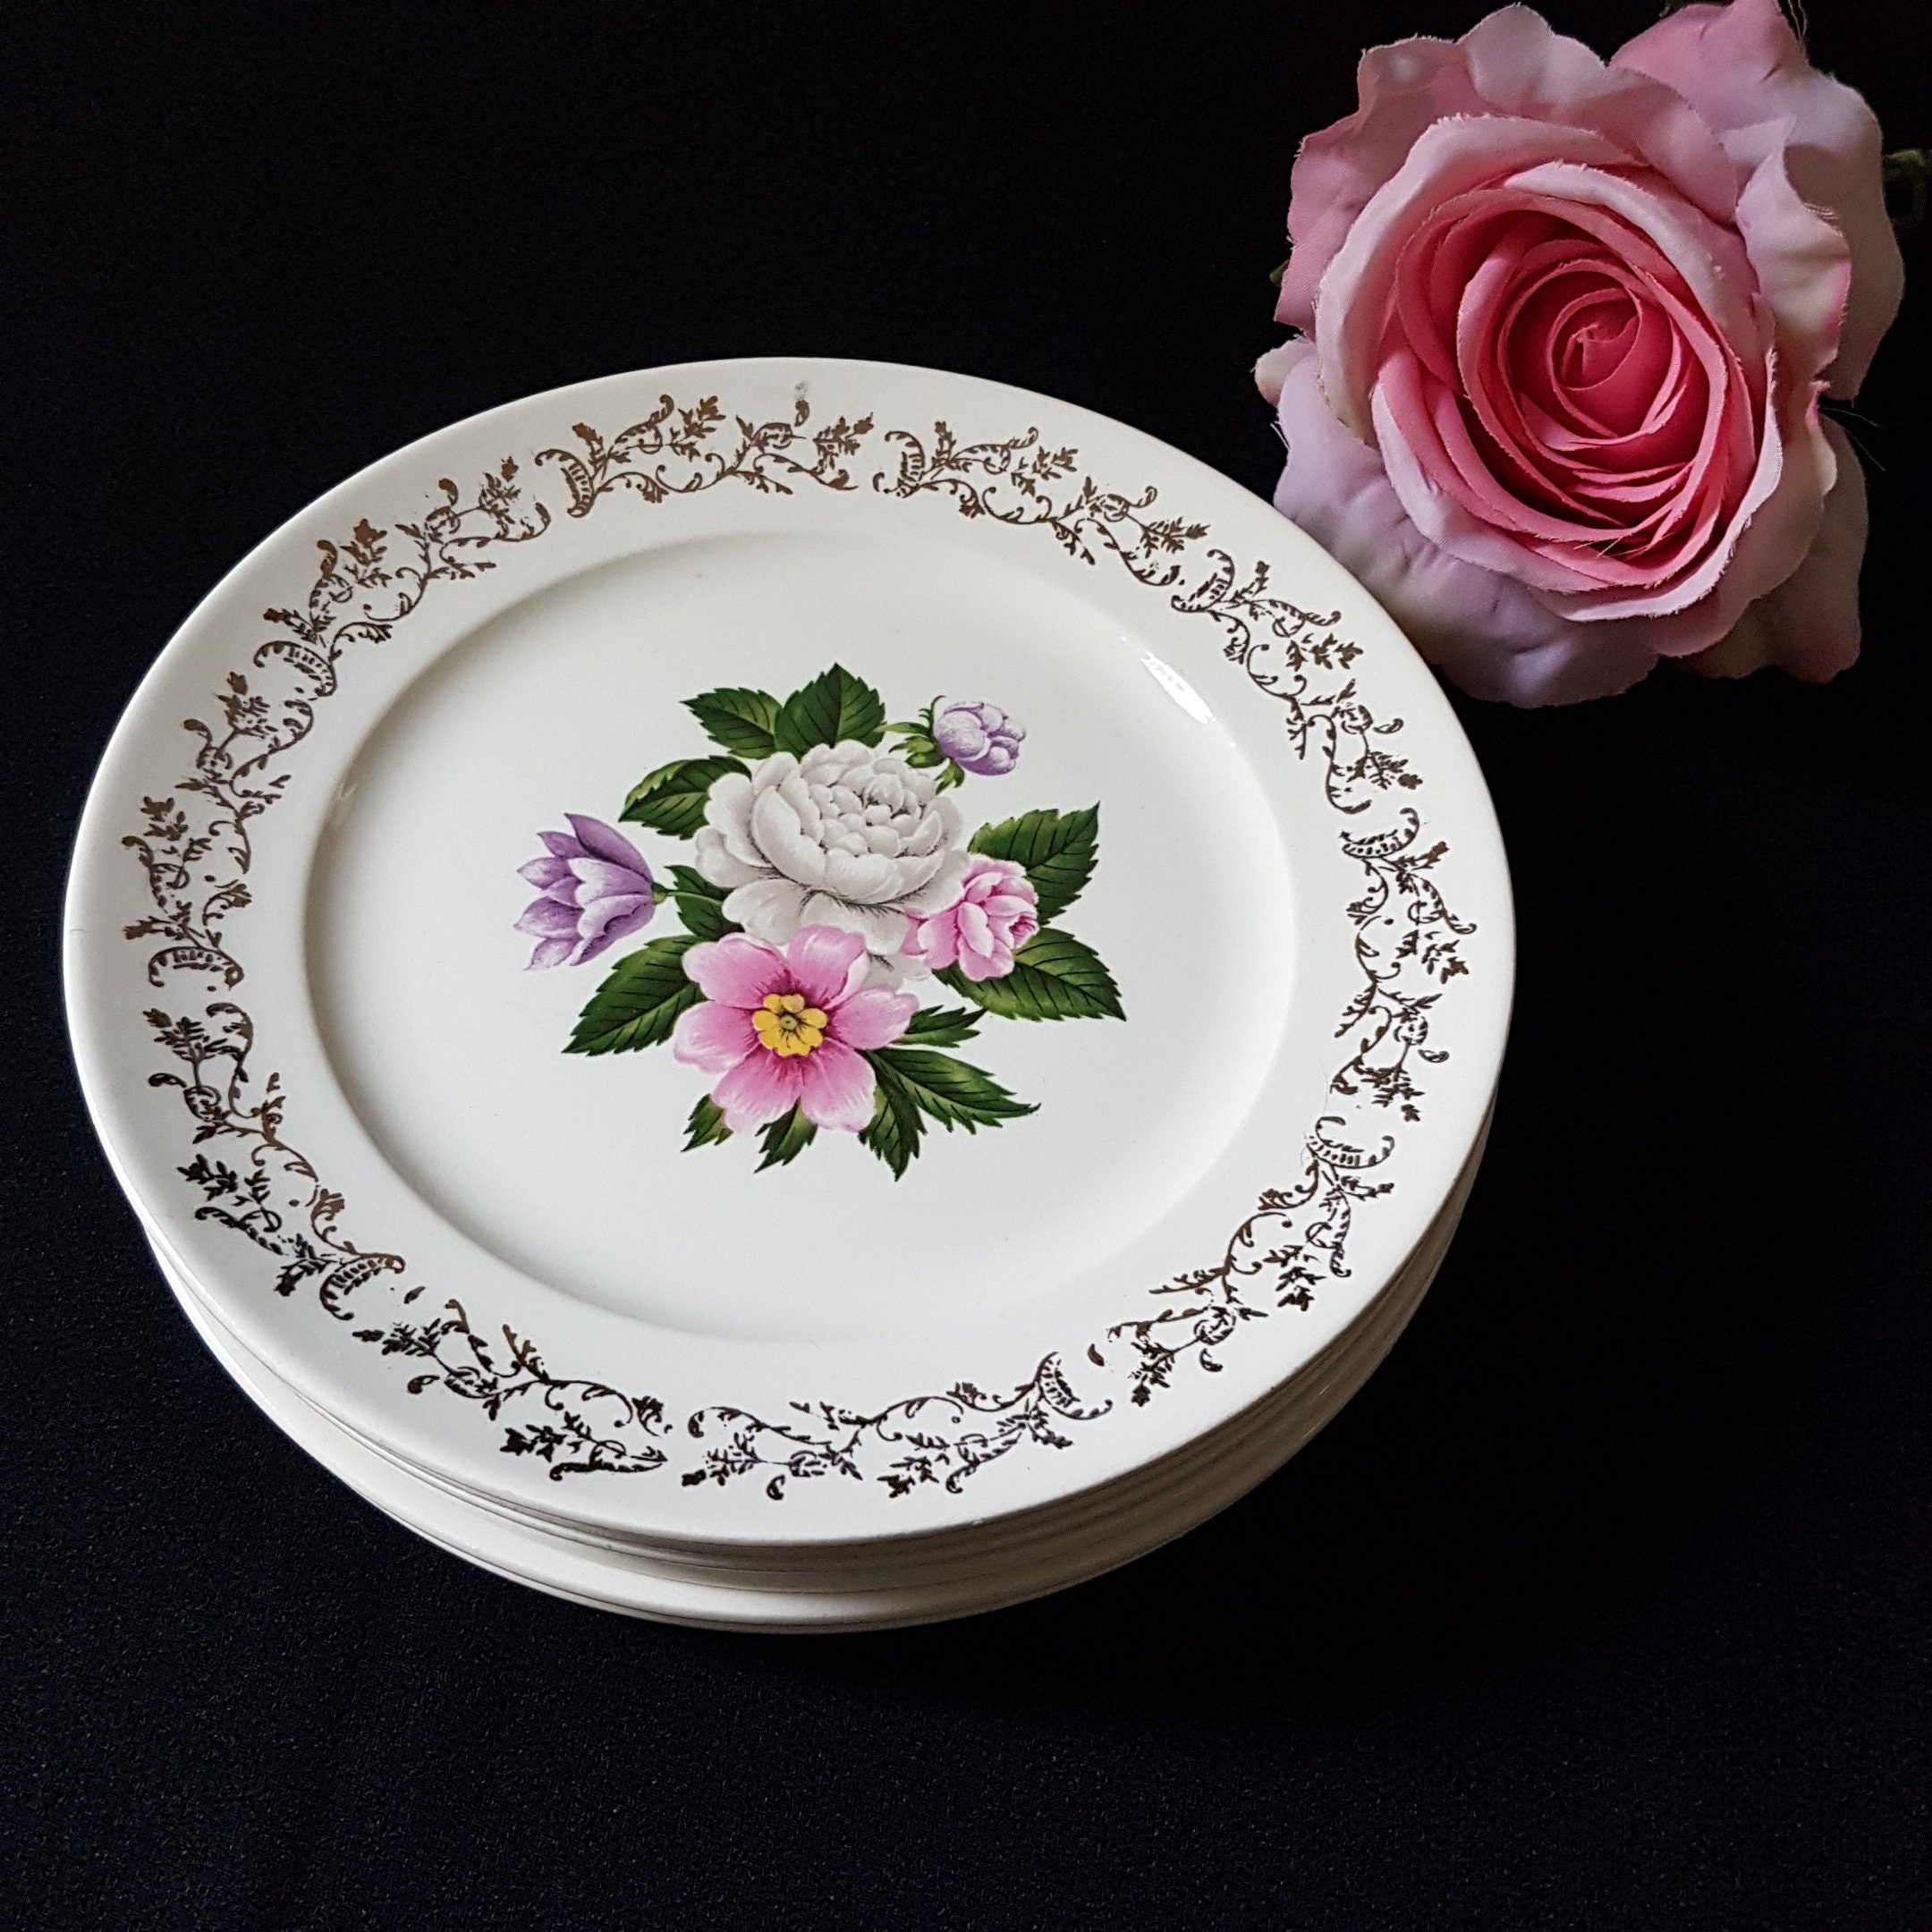 BOUQUET British Empire Ware Set of 6 Side Plates 22t Gold